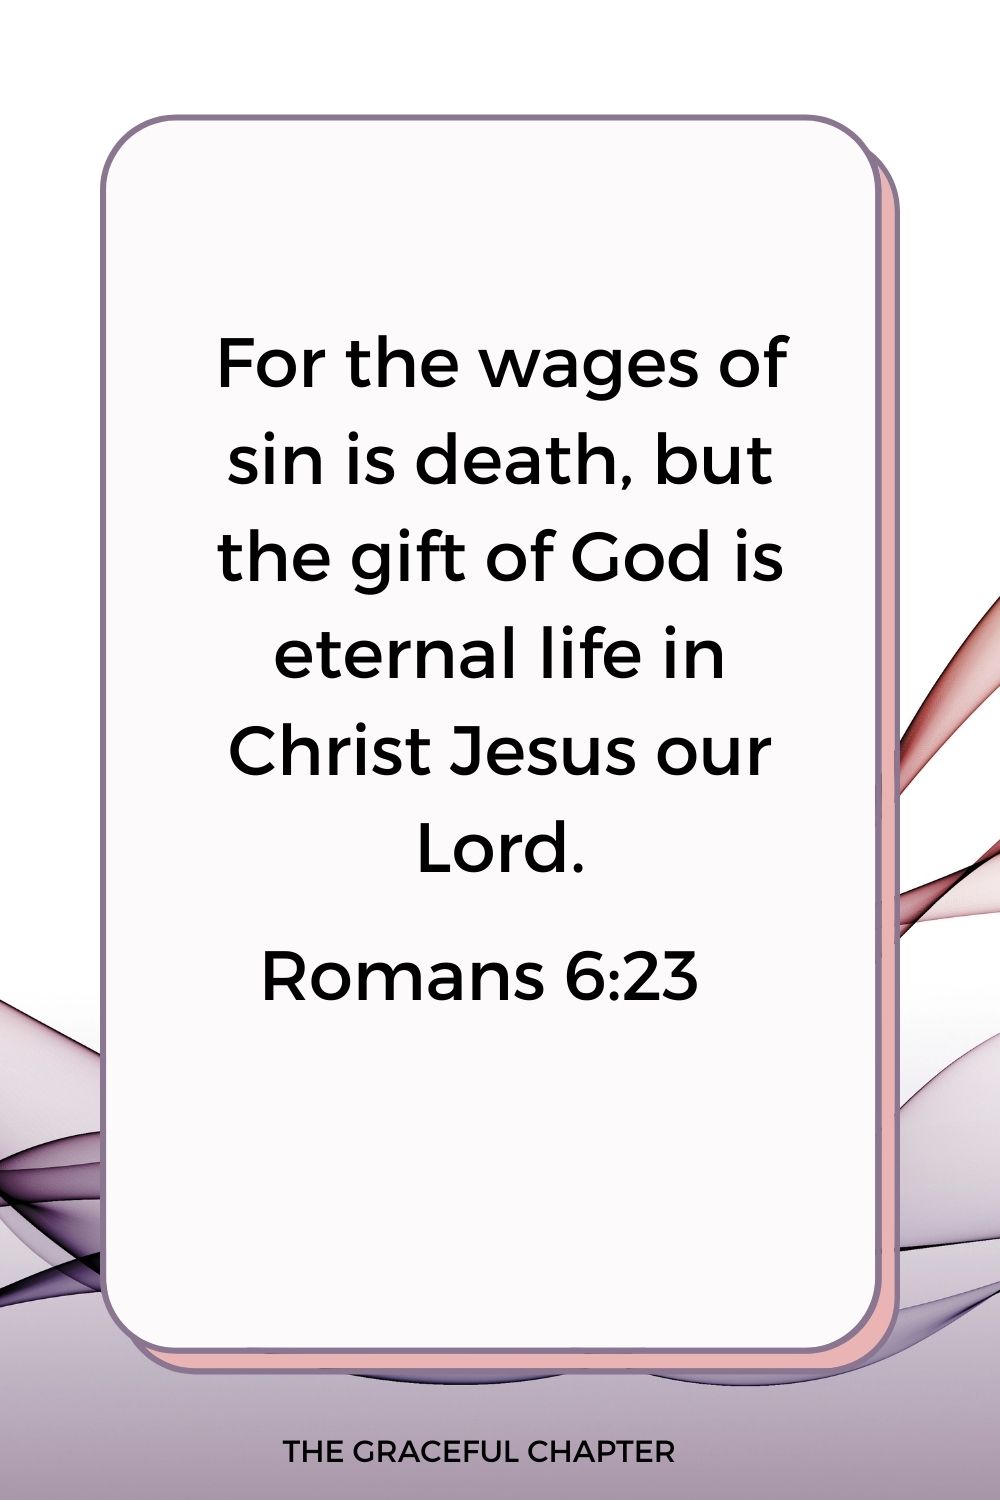 For the wages of sin is death, but the gift of God is eternal life in Christ Jesus our Lord. Romans 6:23